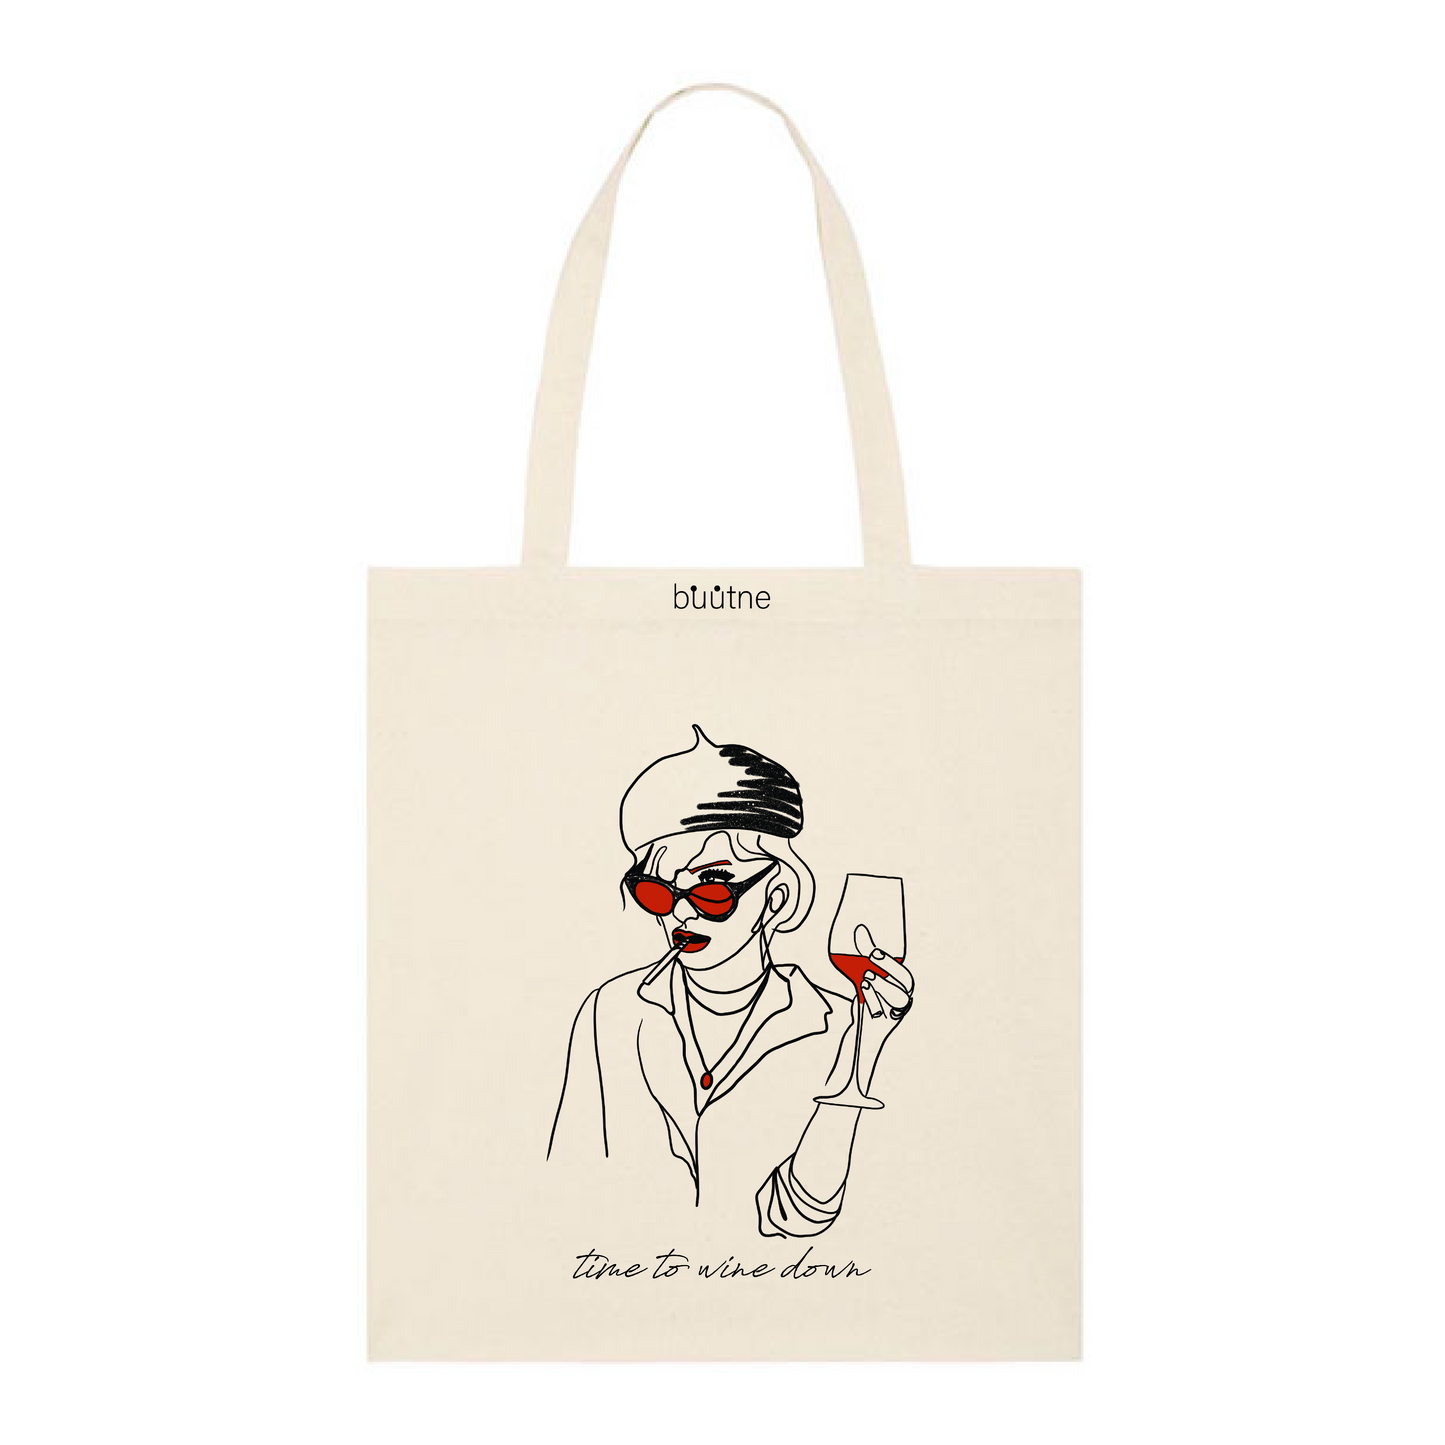 Cotton bag "TIME TO WINE DOWN"